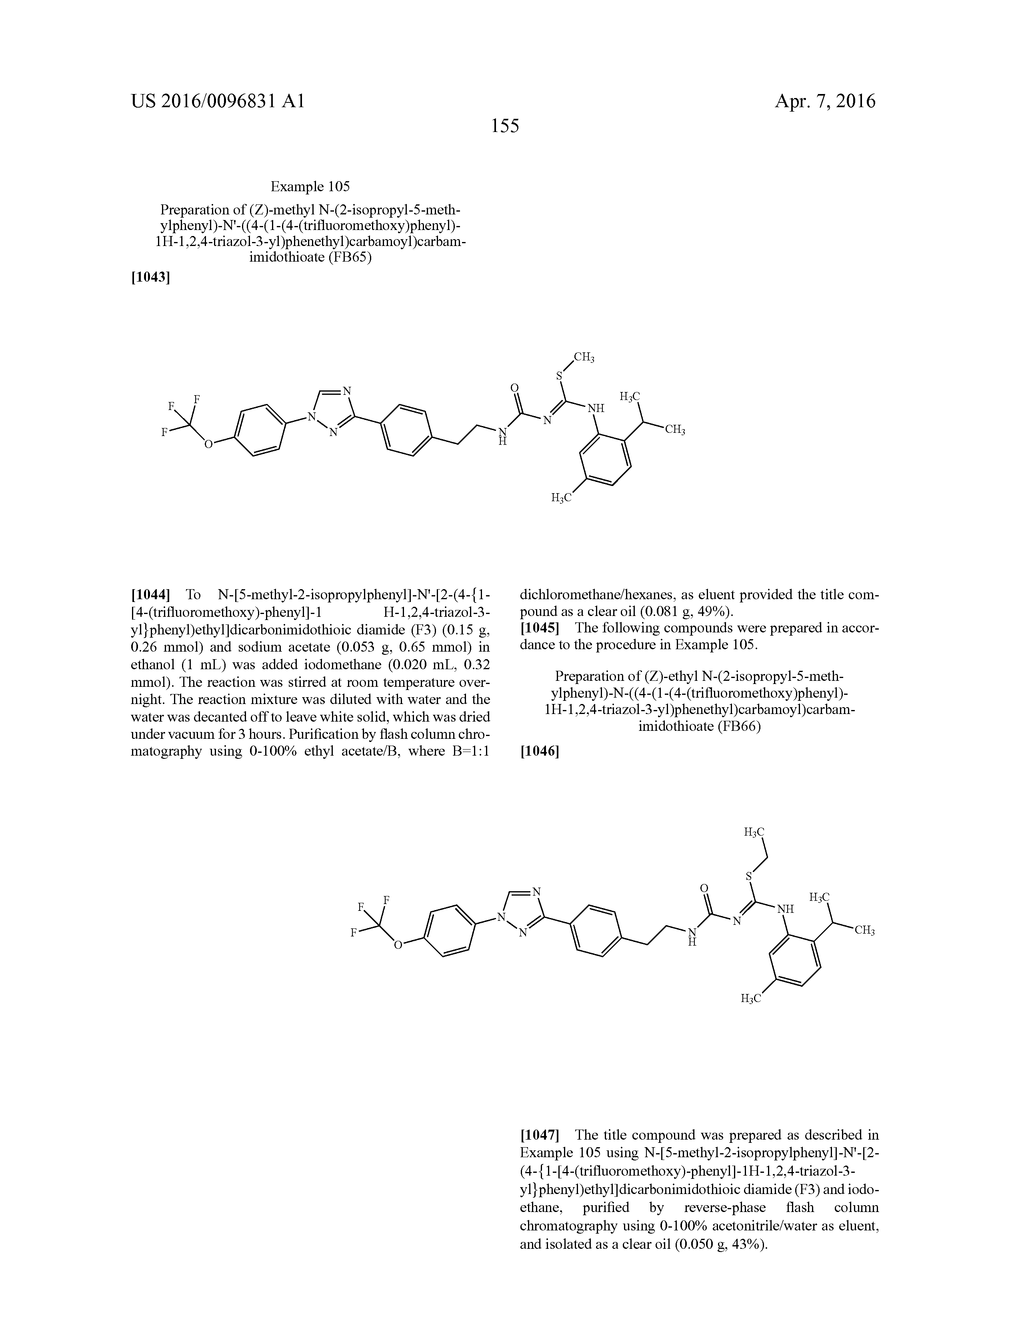 MOLECULES HAVING CERTAIN PESTICIDAL UTILITIES, AND INTERMEDIATES,     COMPOSITIONS, AND PROCESSES RELATED THERETO - diagram, schematic, and image 156